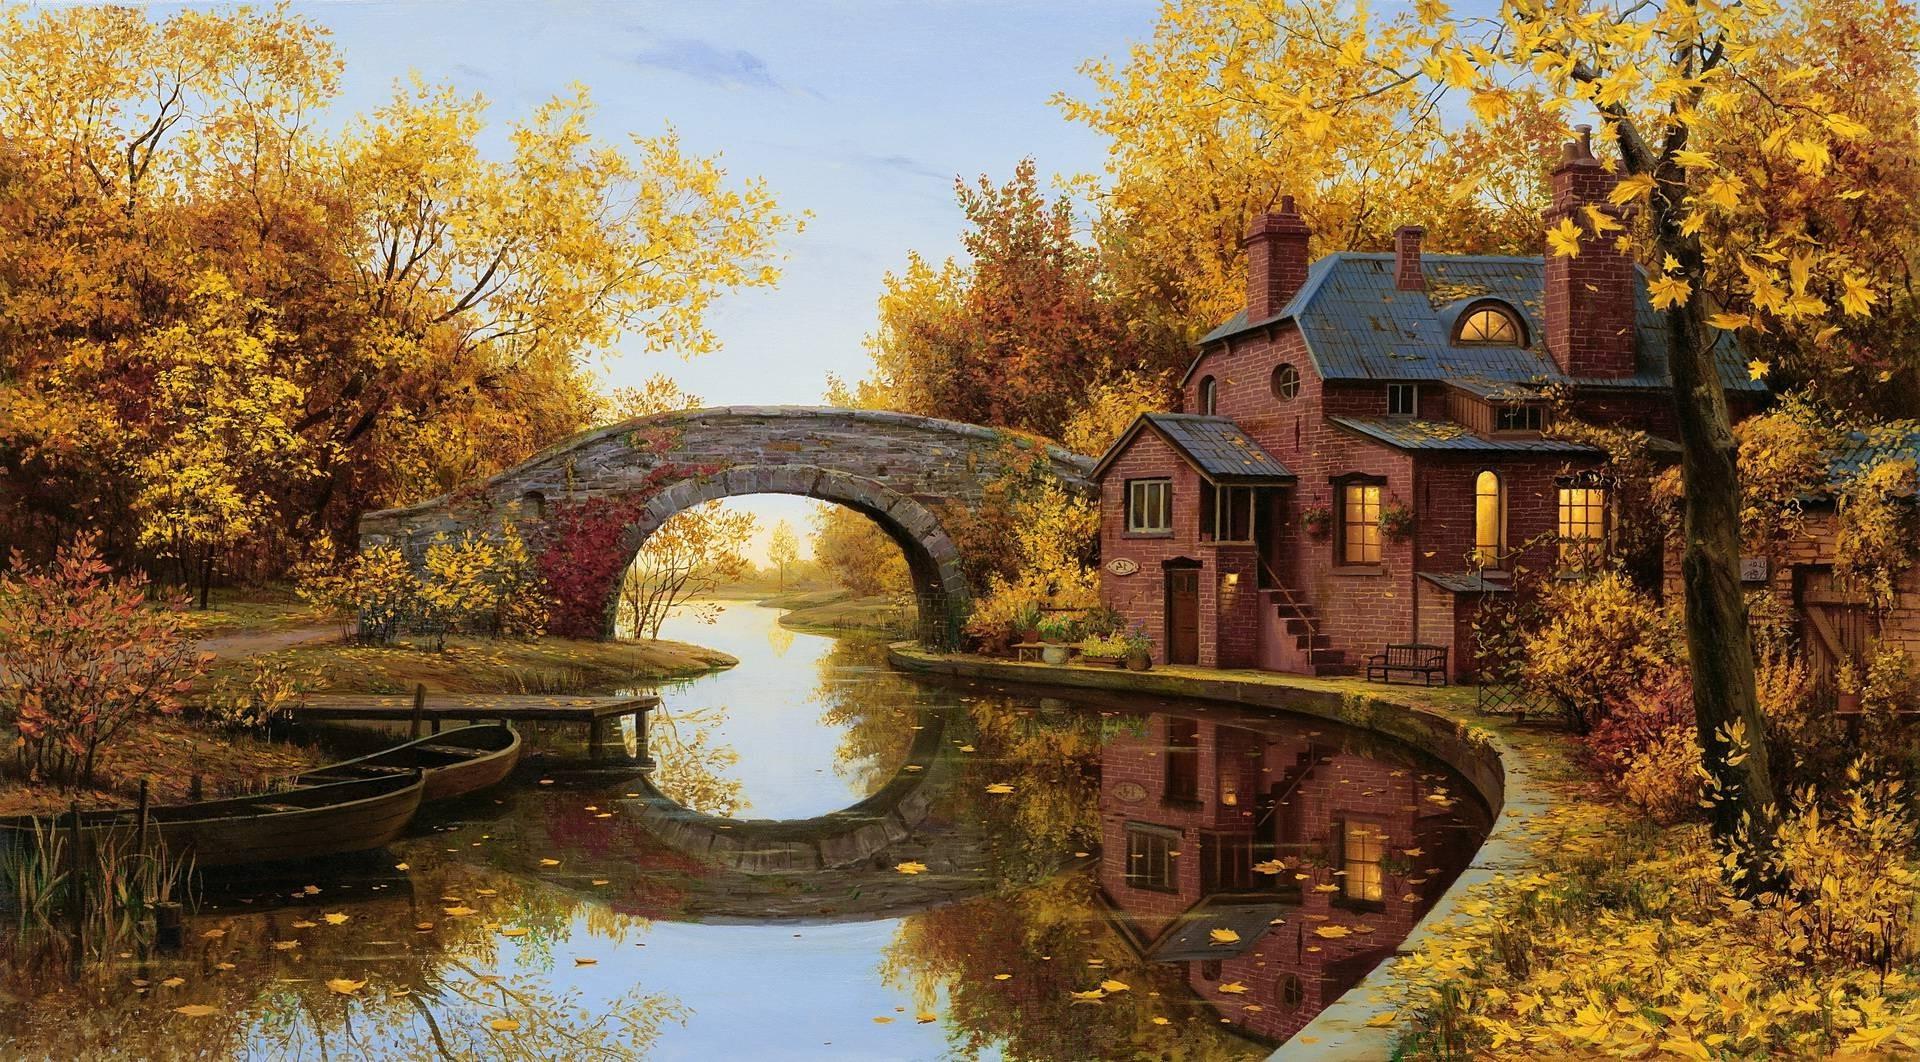 reflection bridge arch river house trees boat fall